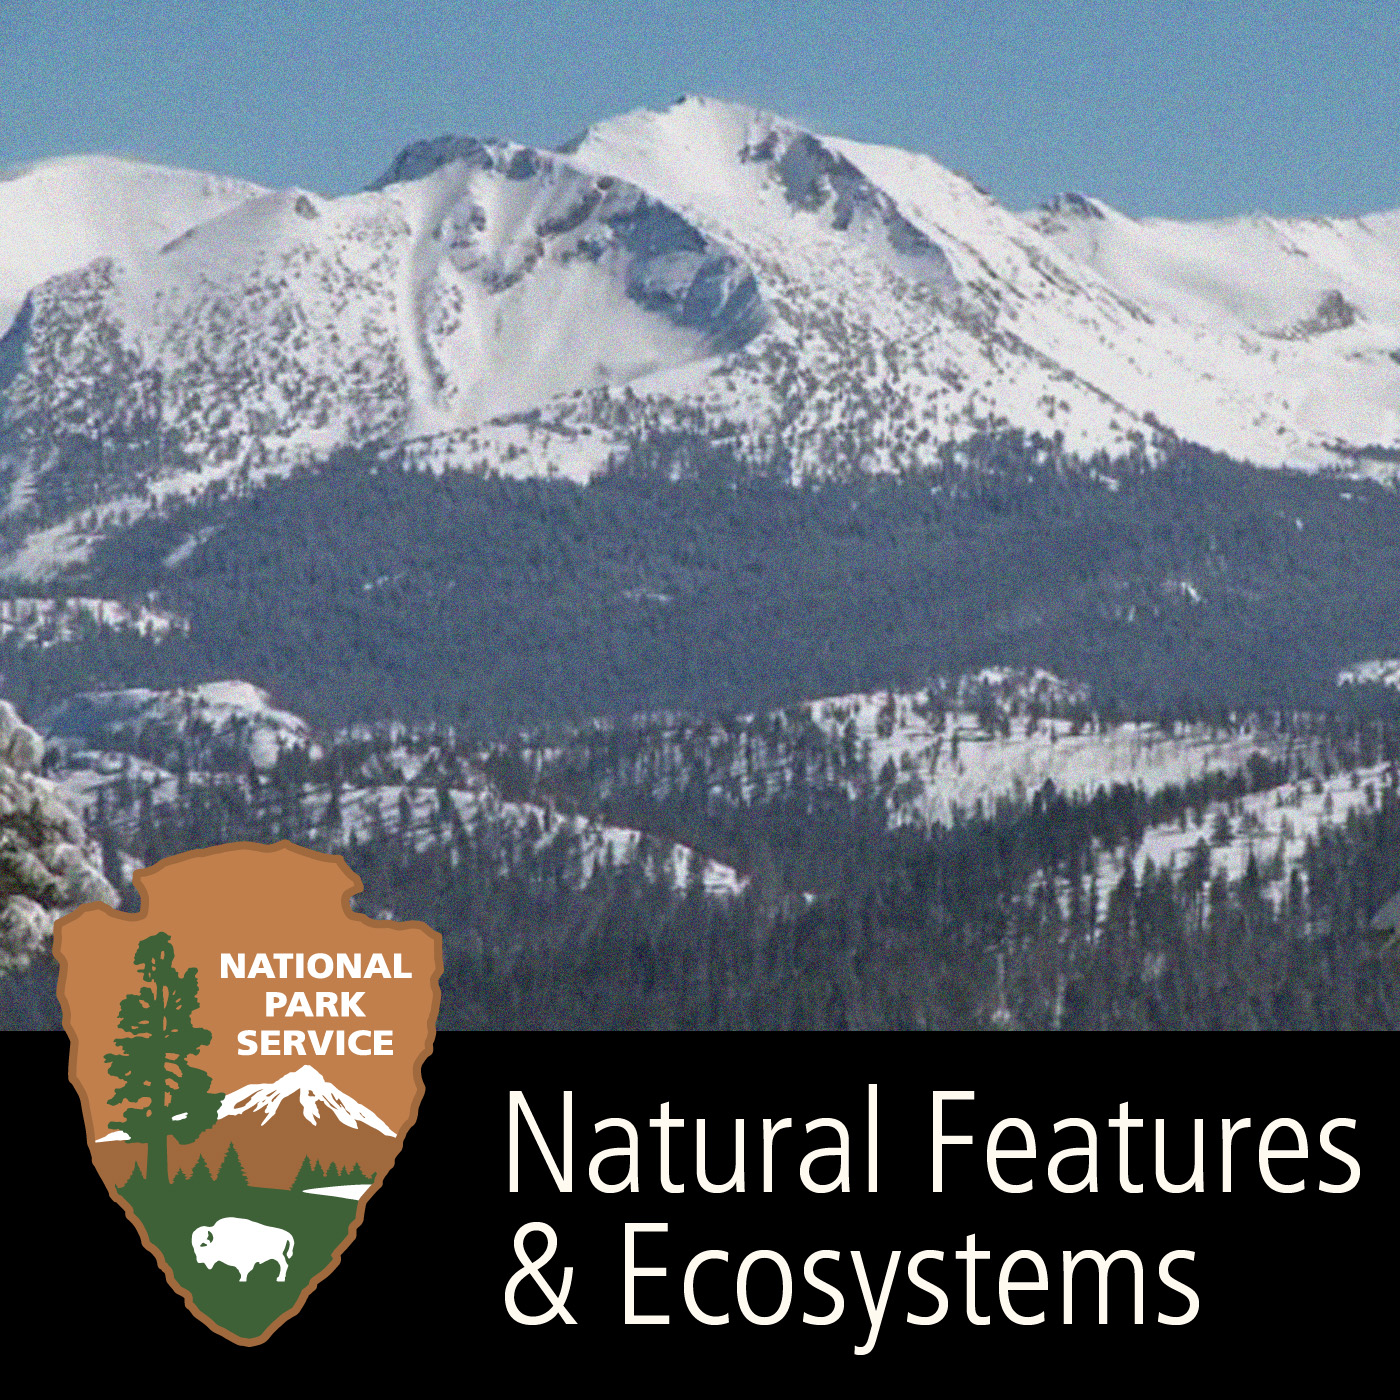 Natural Features & Ecosystems